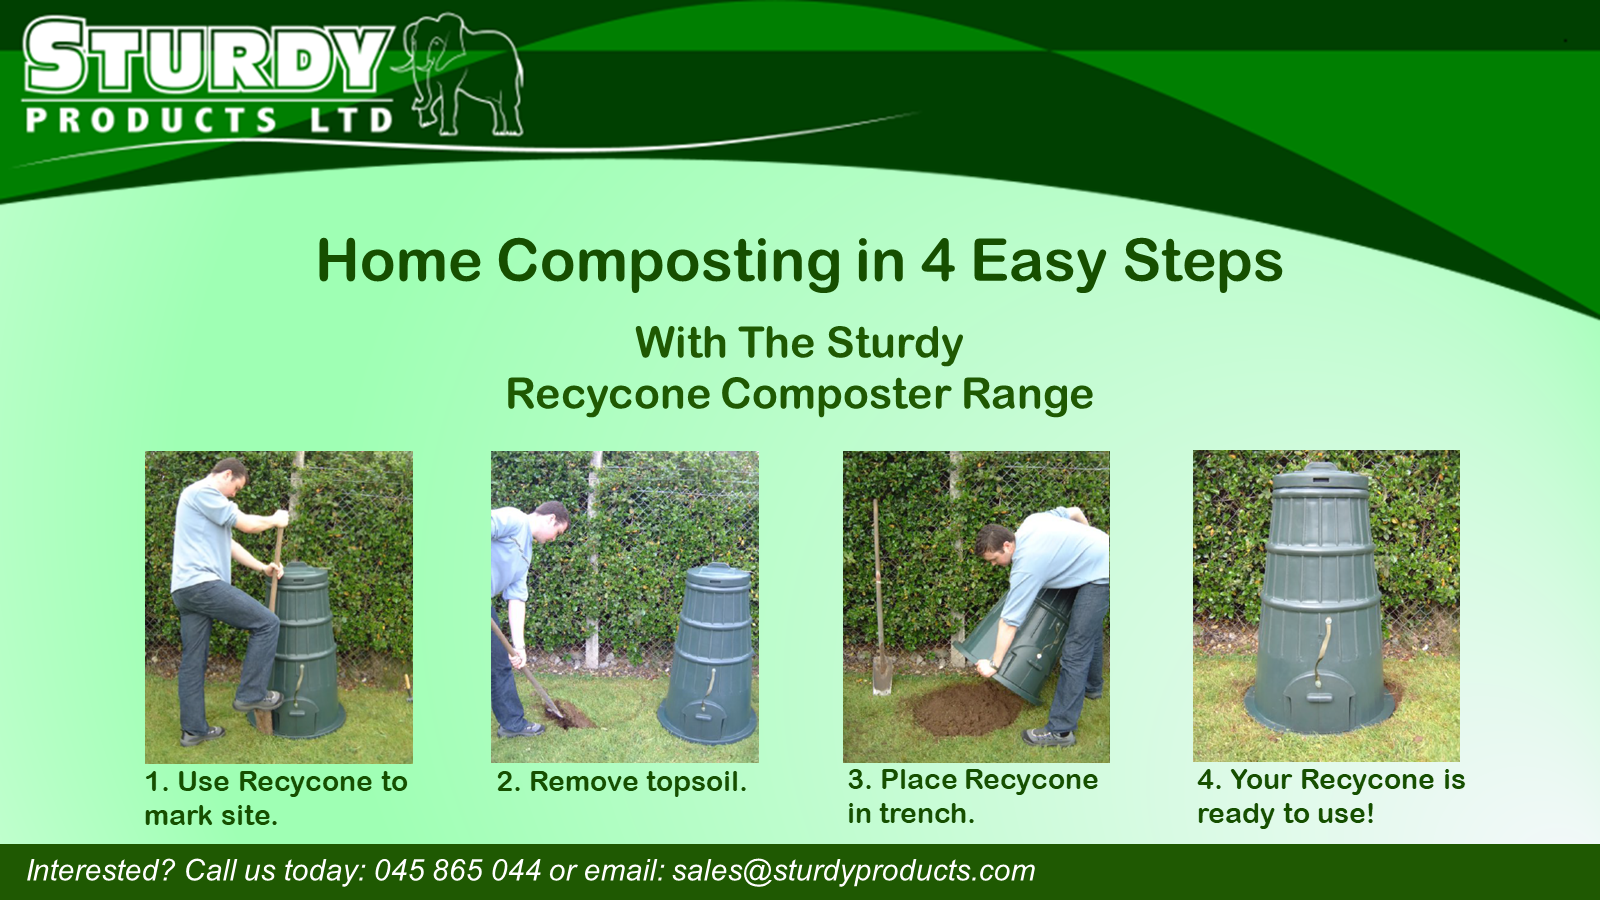 A series of images demonstrating the simple set up procedure for a Sturdy Recycone Composter